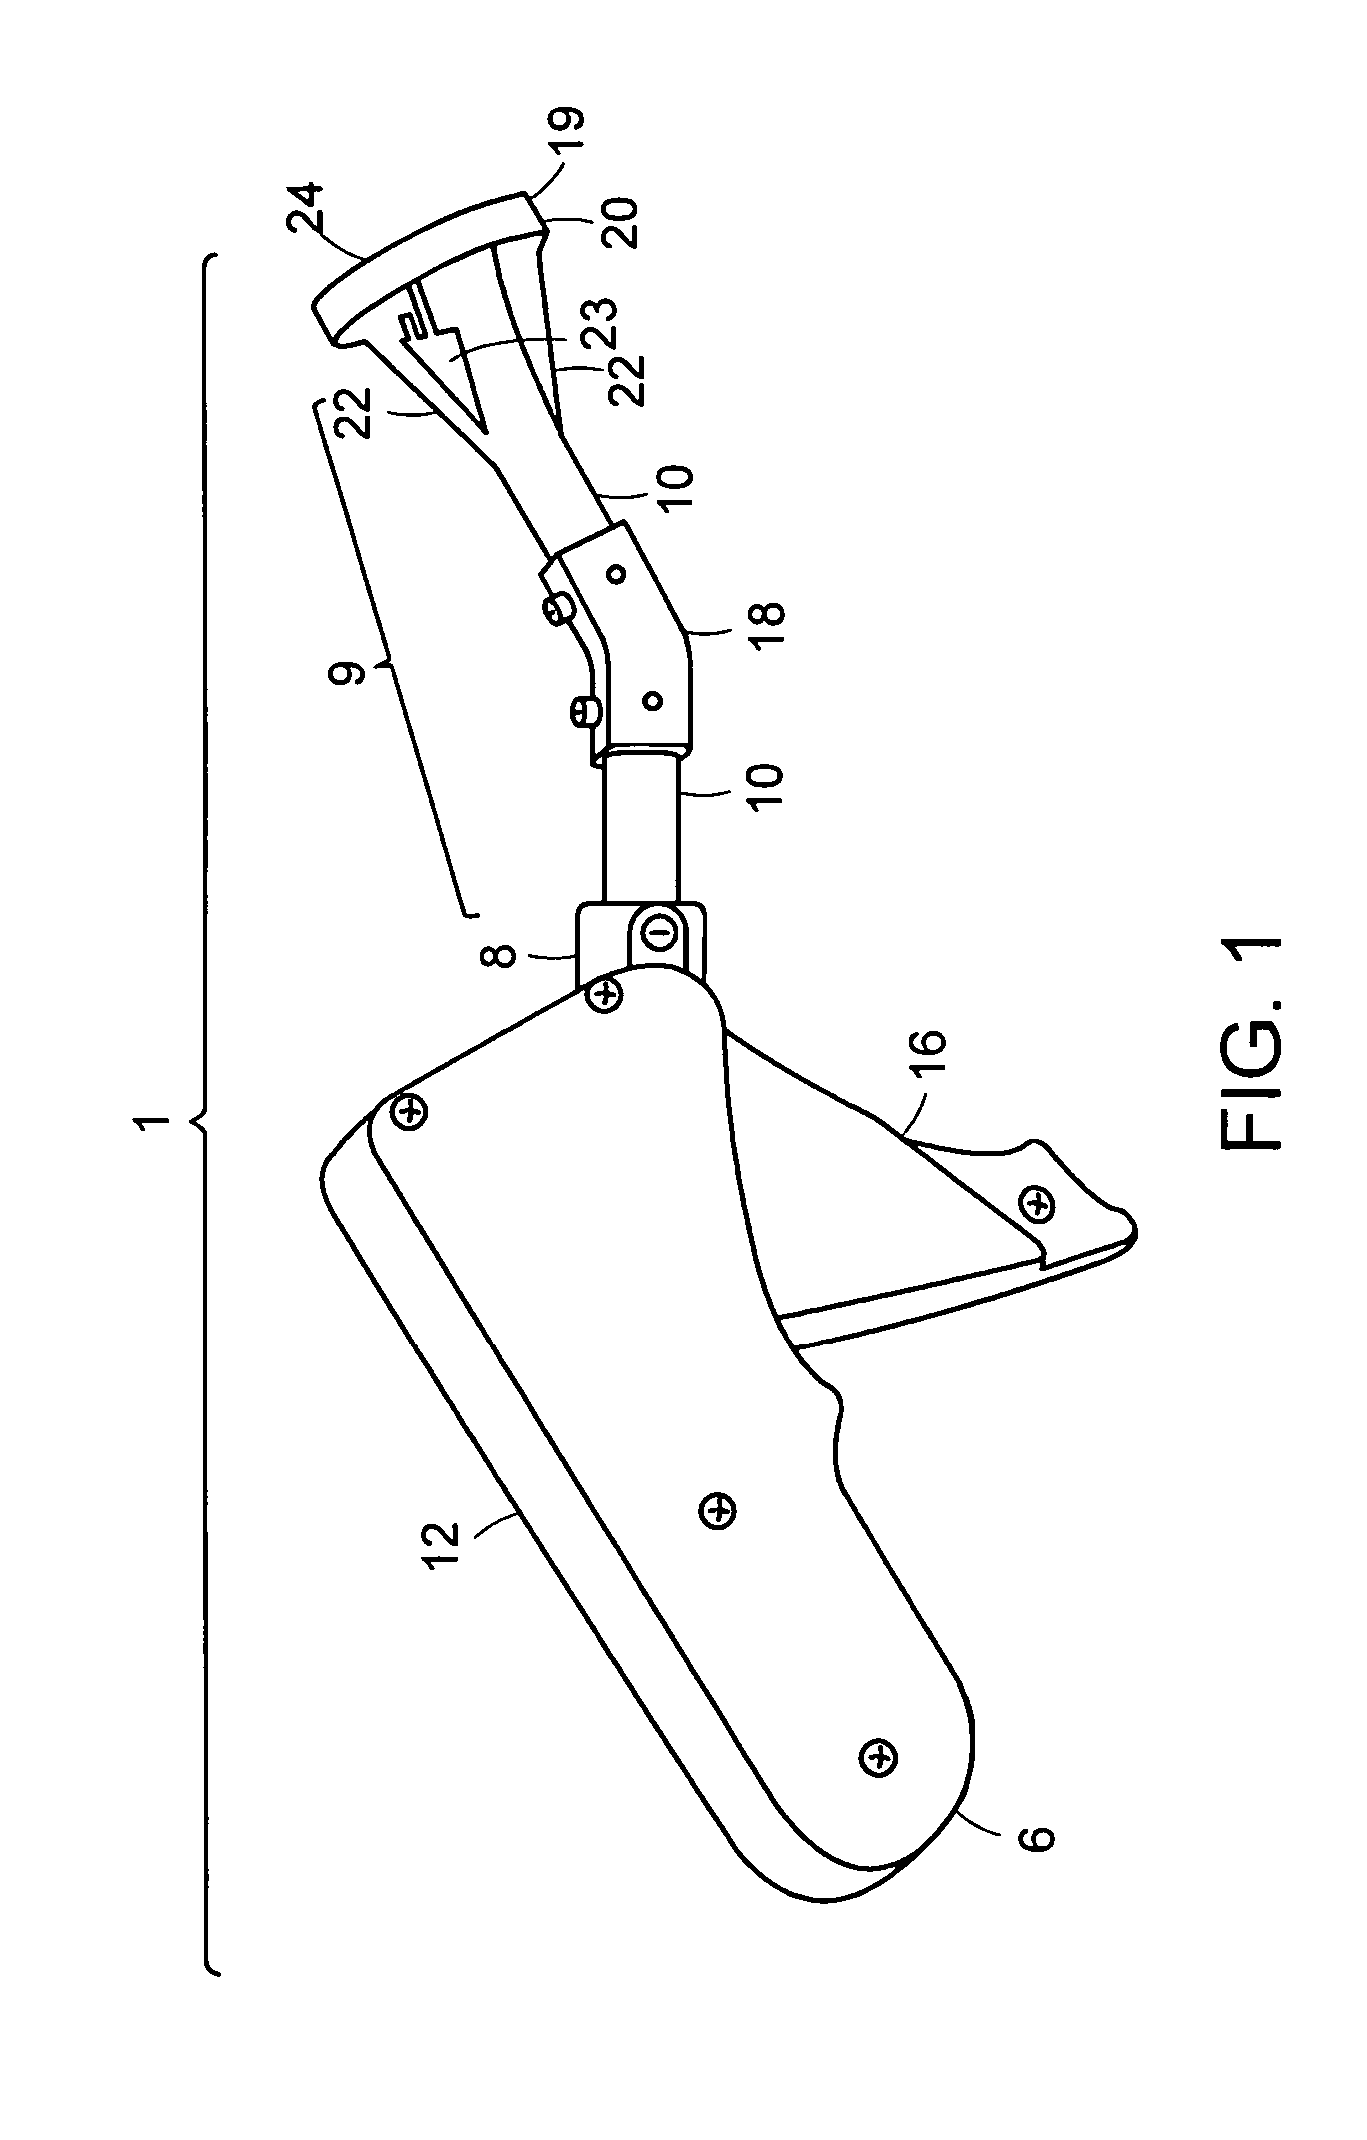 Apparatus for surgical suturing with thread management